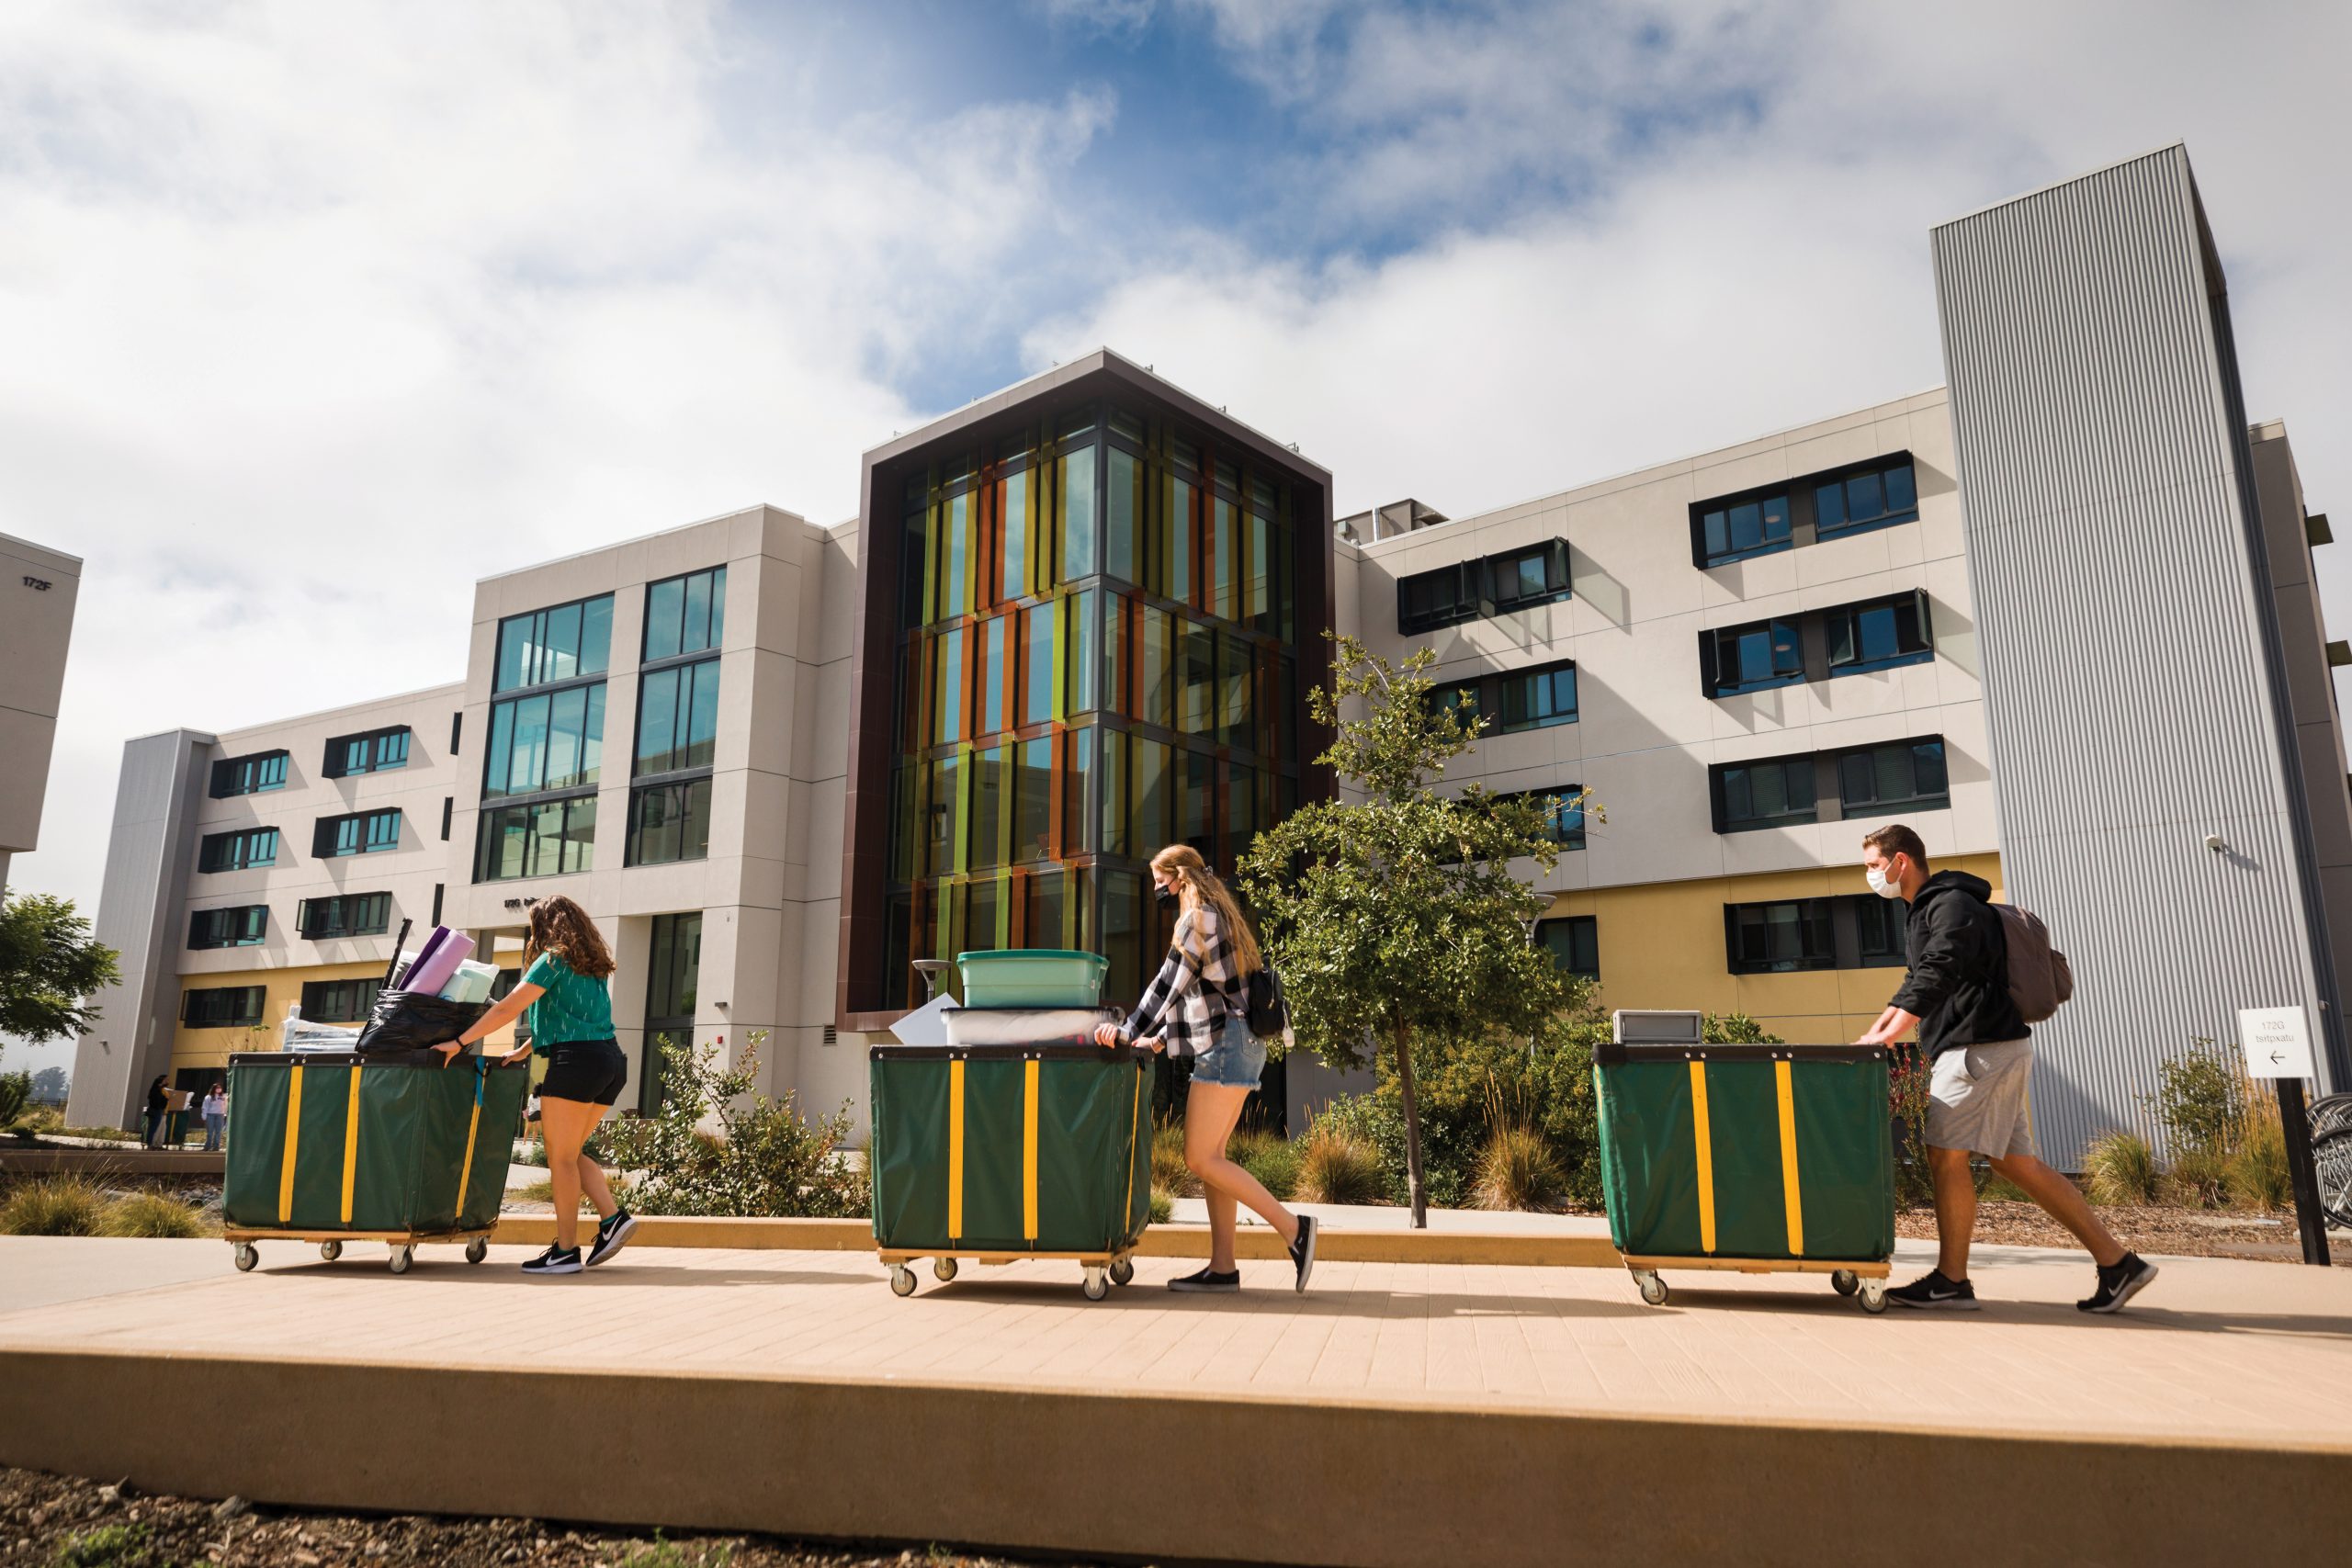 Three students push green and gold carts across a courtyard in front of a large residence hall with a multi-colored tower window